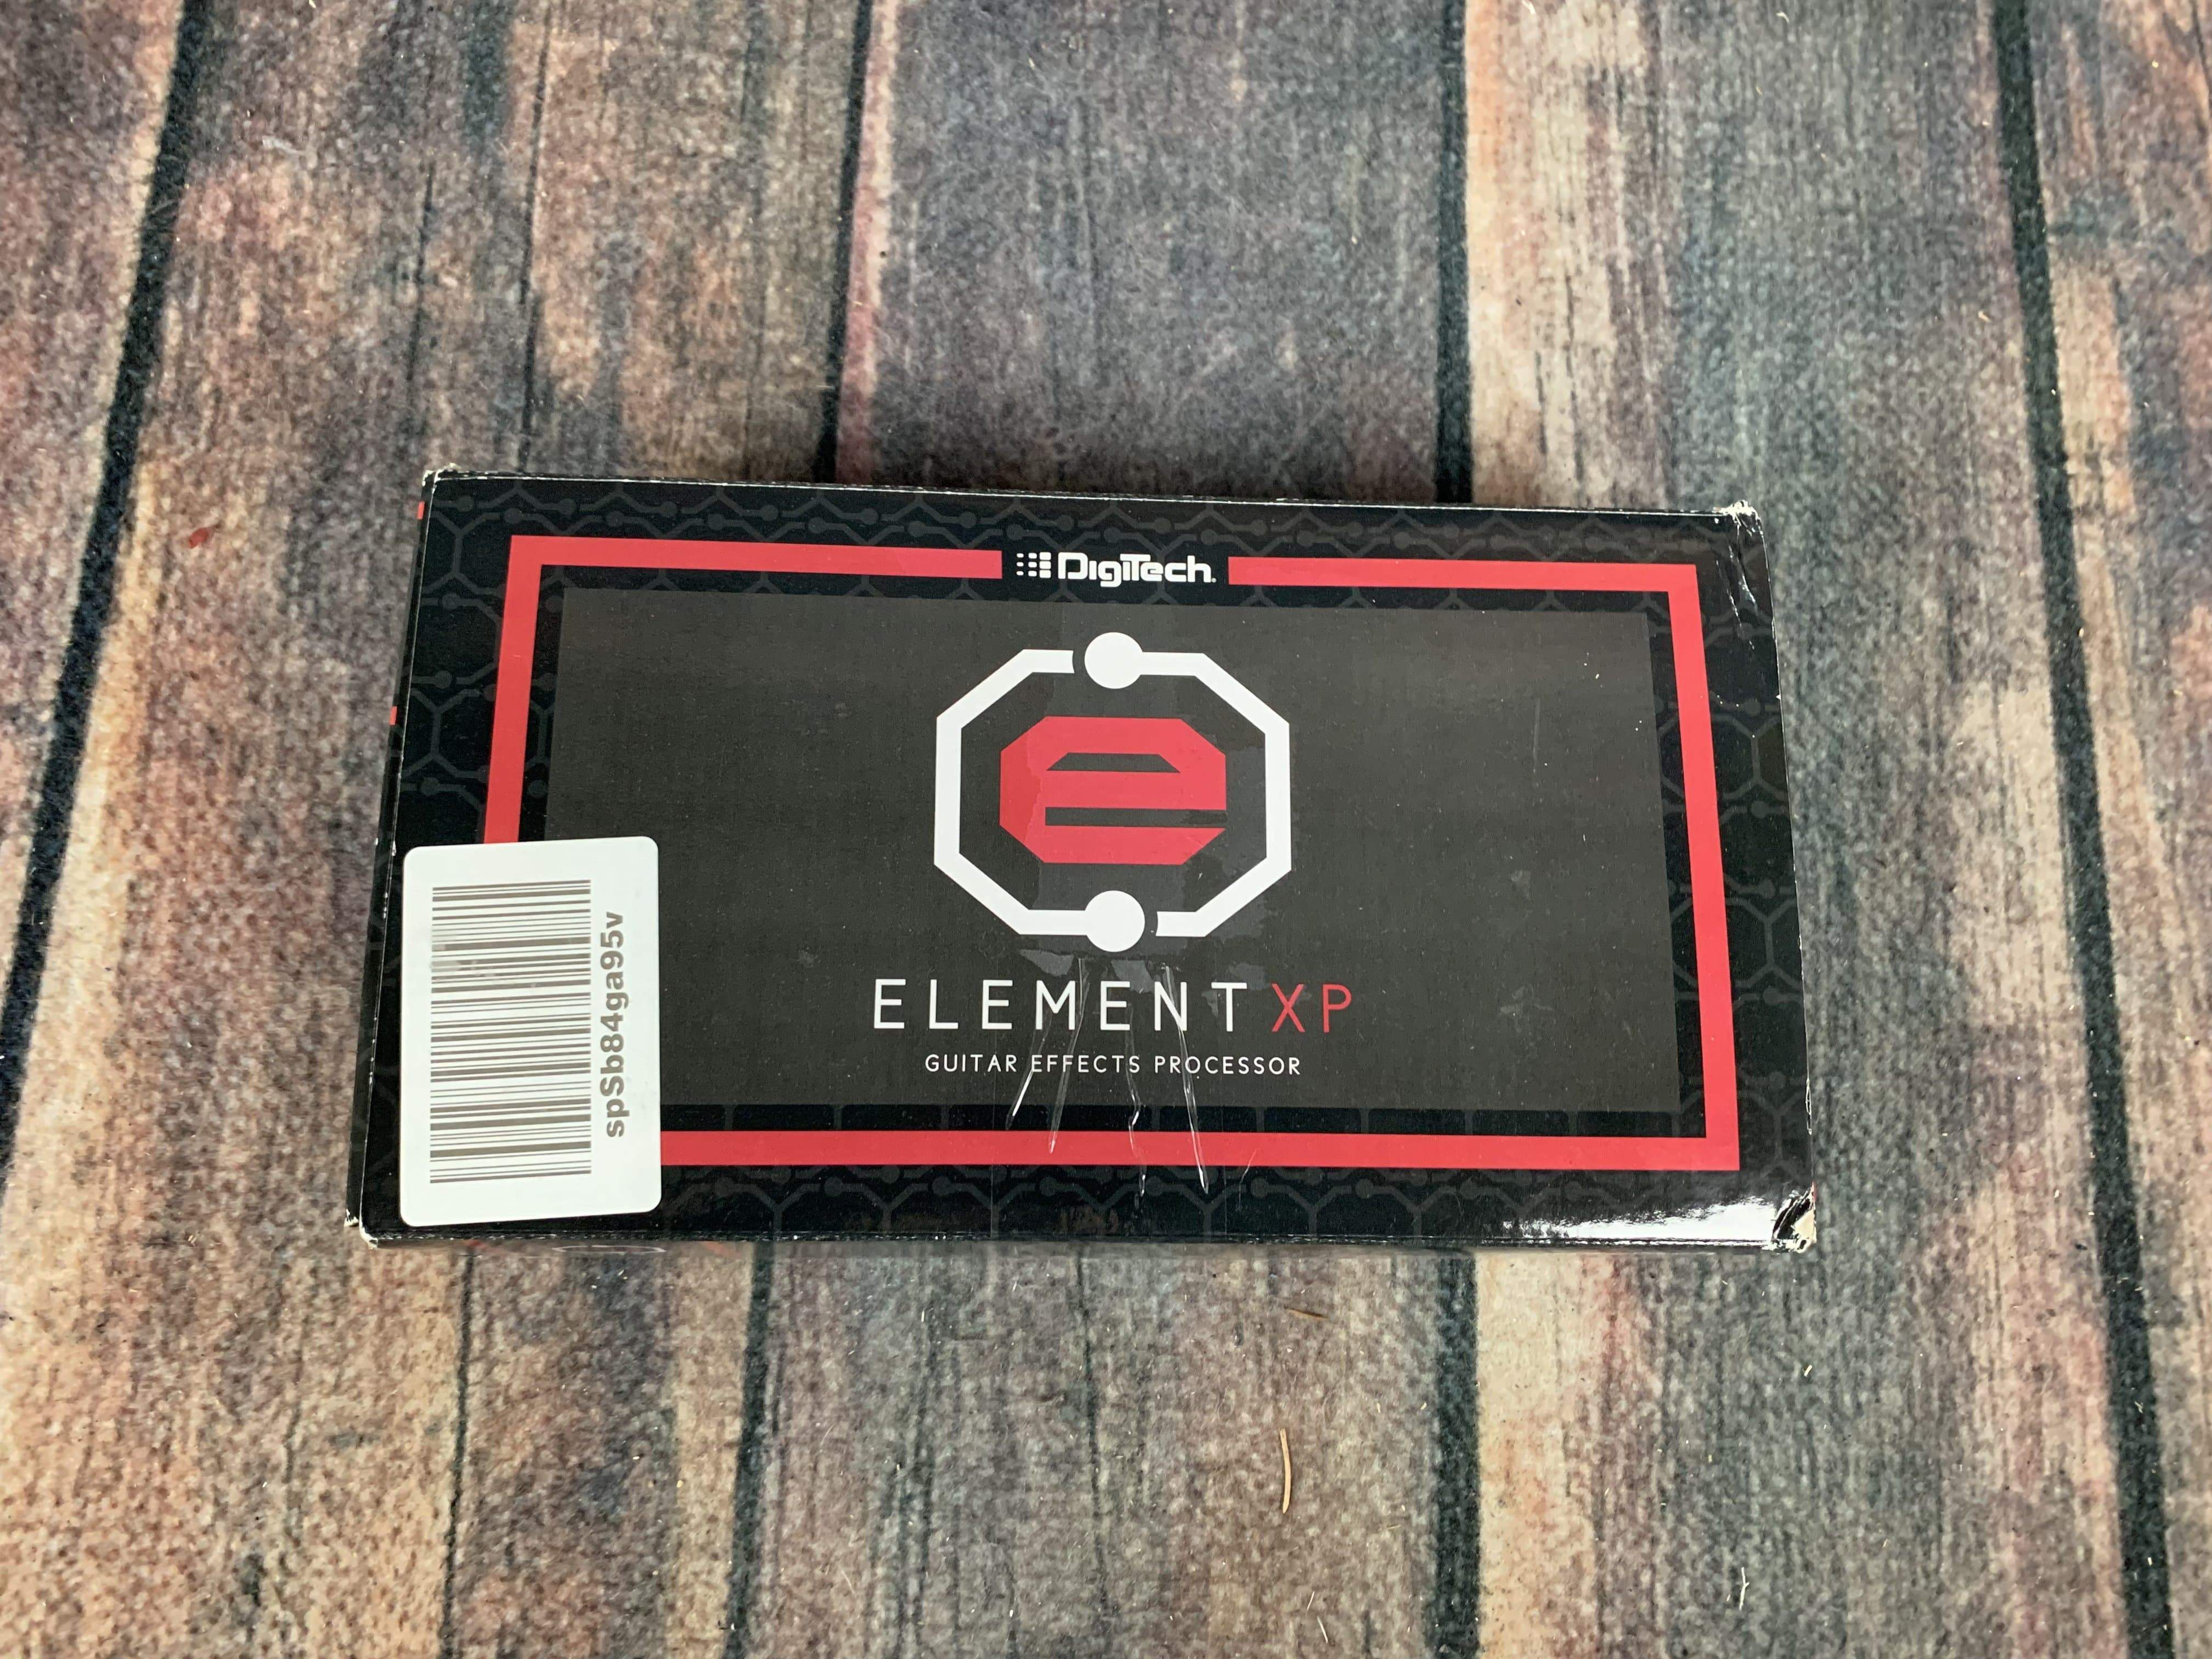 Used Digitech Element XP Multi-Effect Processor with Box